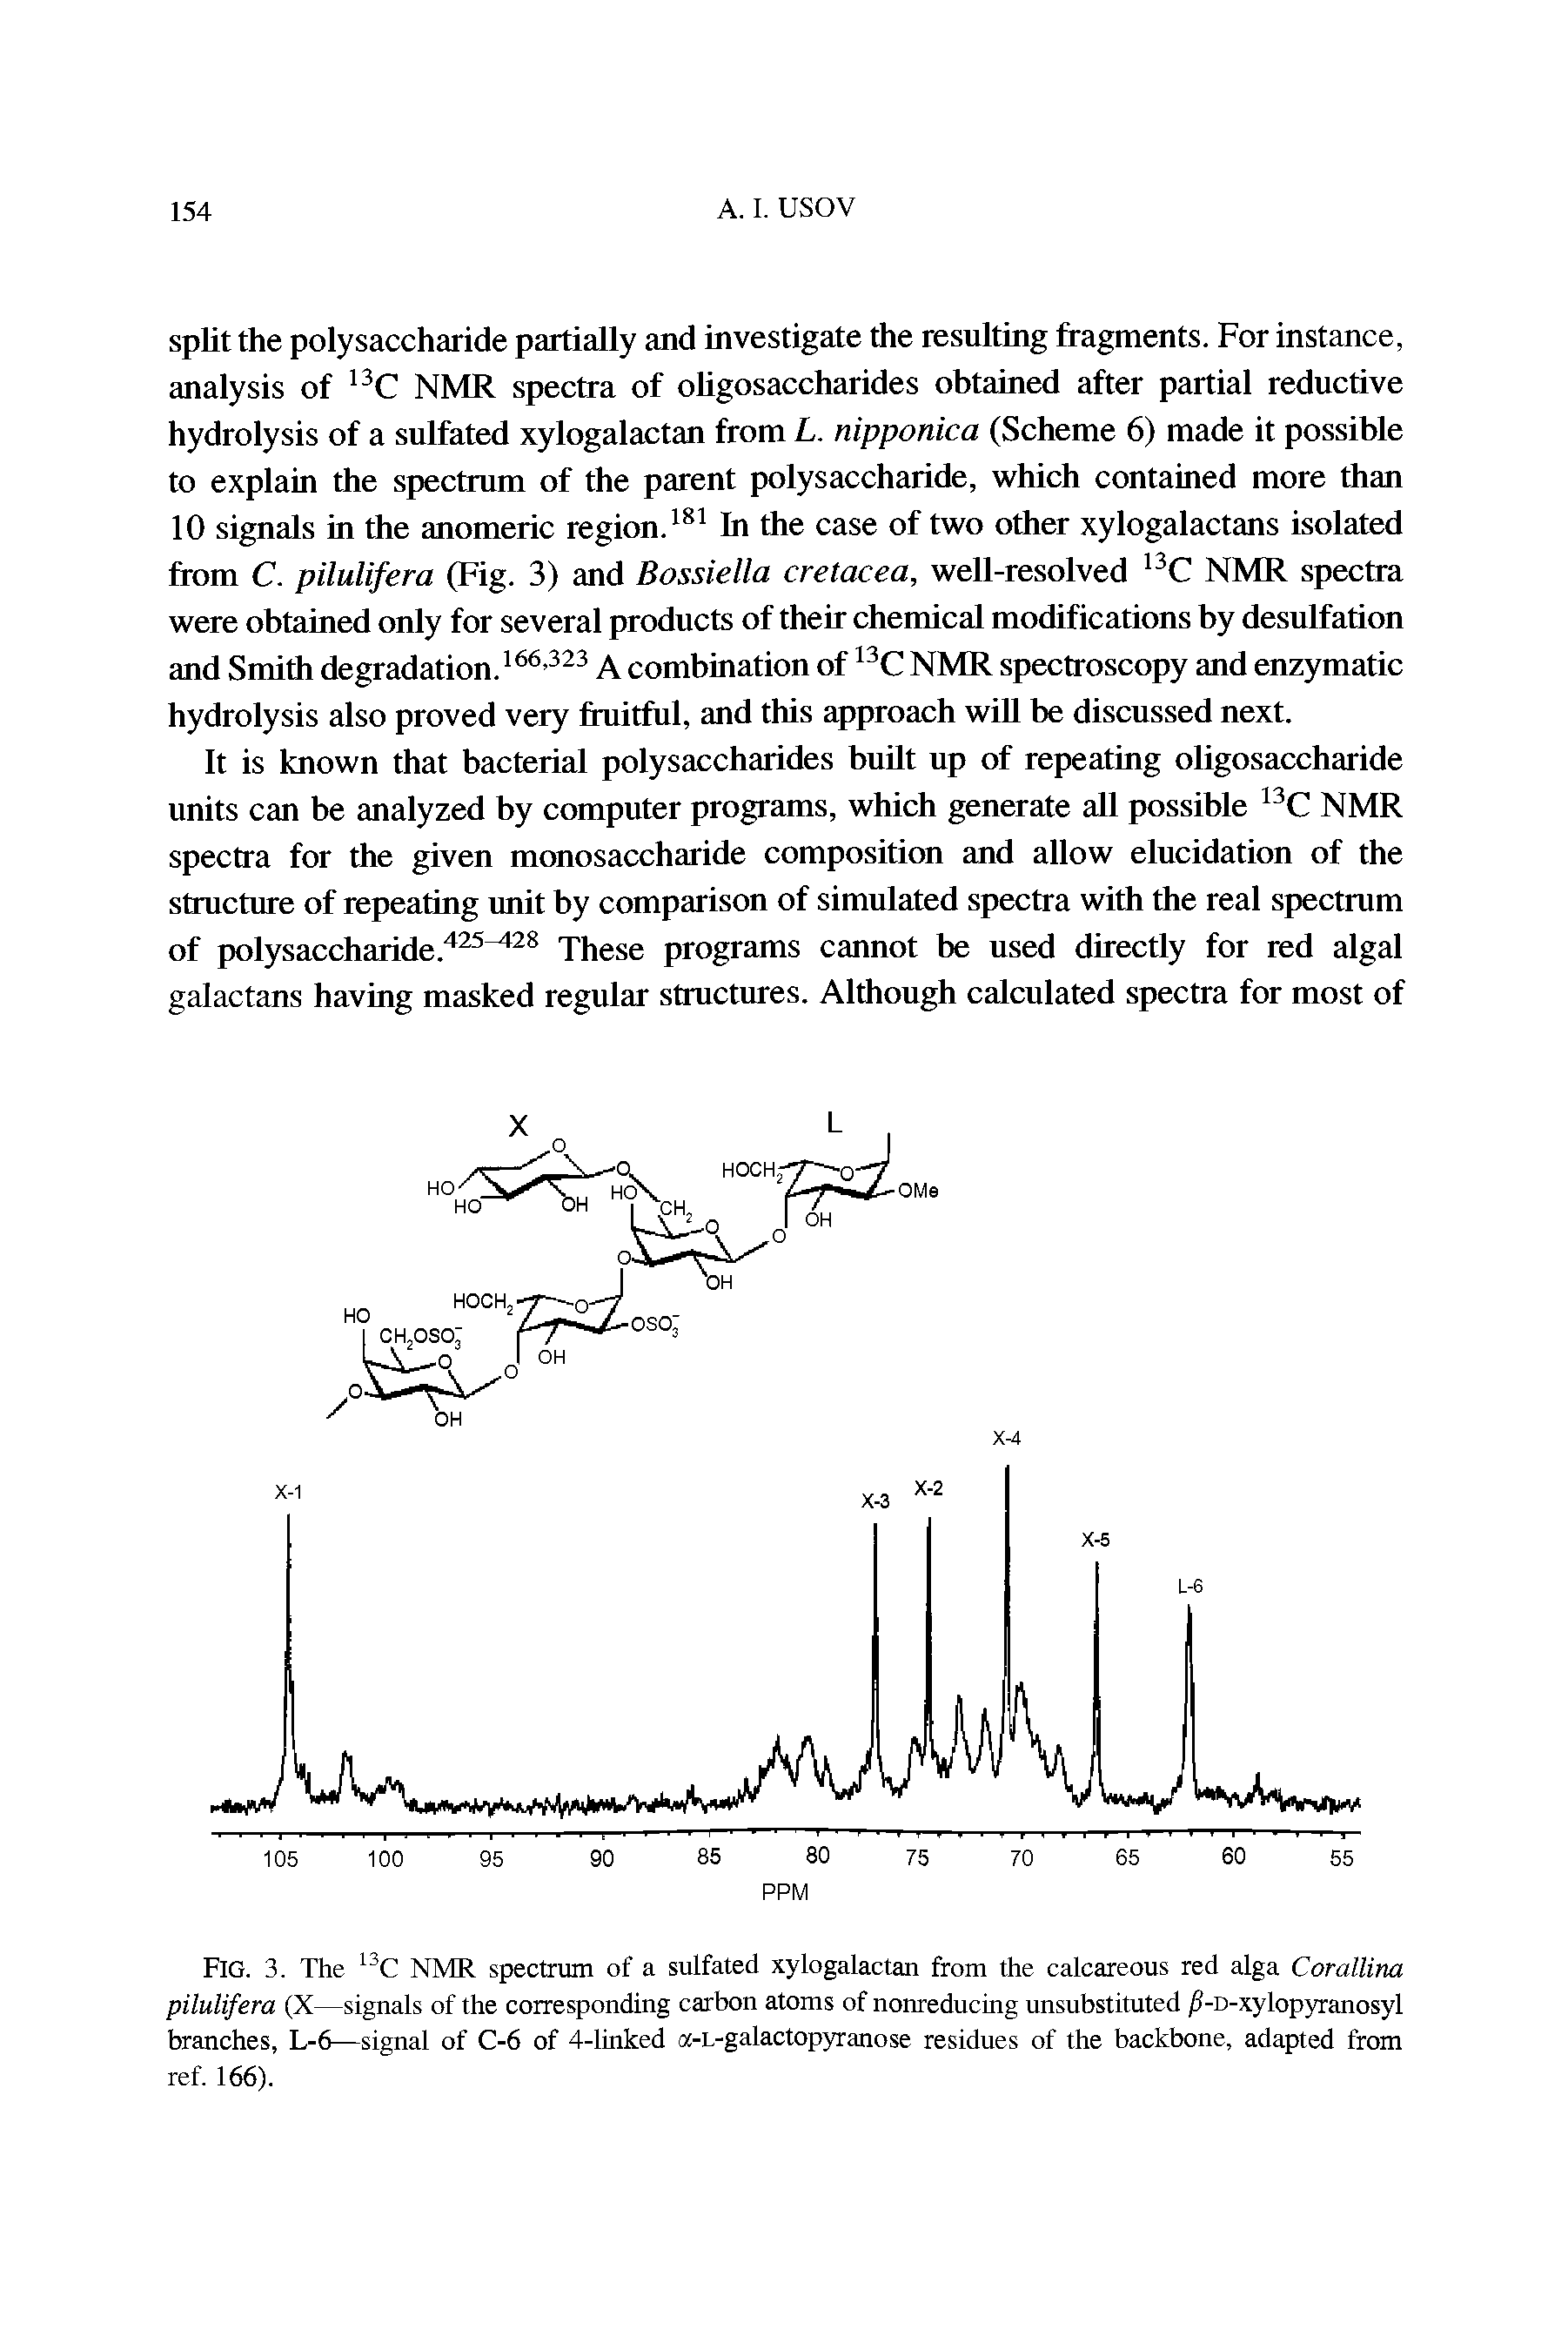 Fig. 3. The 13C NMR spectrum of a sulfated xylogalactan from the calcareous red alga Corallina pilulifera (X—signals of the corresponding carbon atoms of nonreducing unsubstituted /J-D-xylopyranosyl branches, L-6—signal of C-6 of 4-linked a-L-galactopyranose residues of the backbone, adapted from ref. 166).